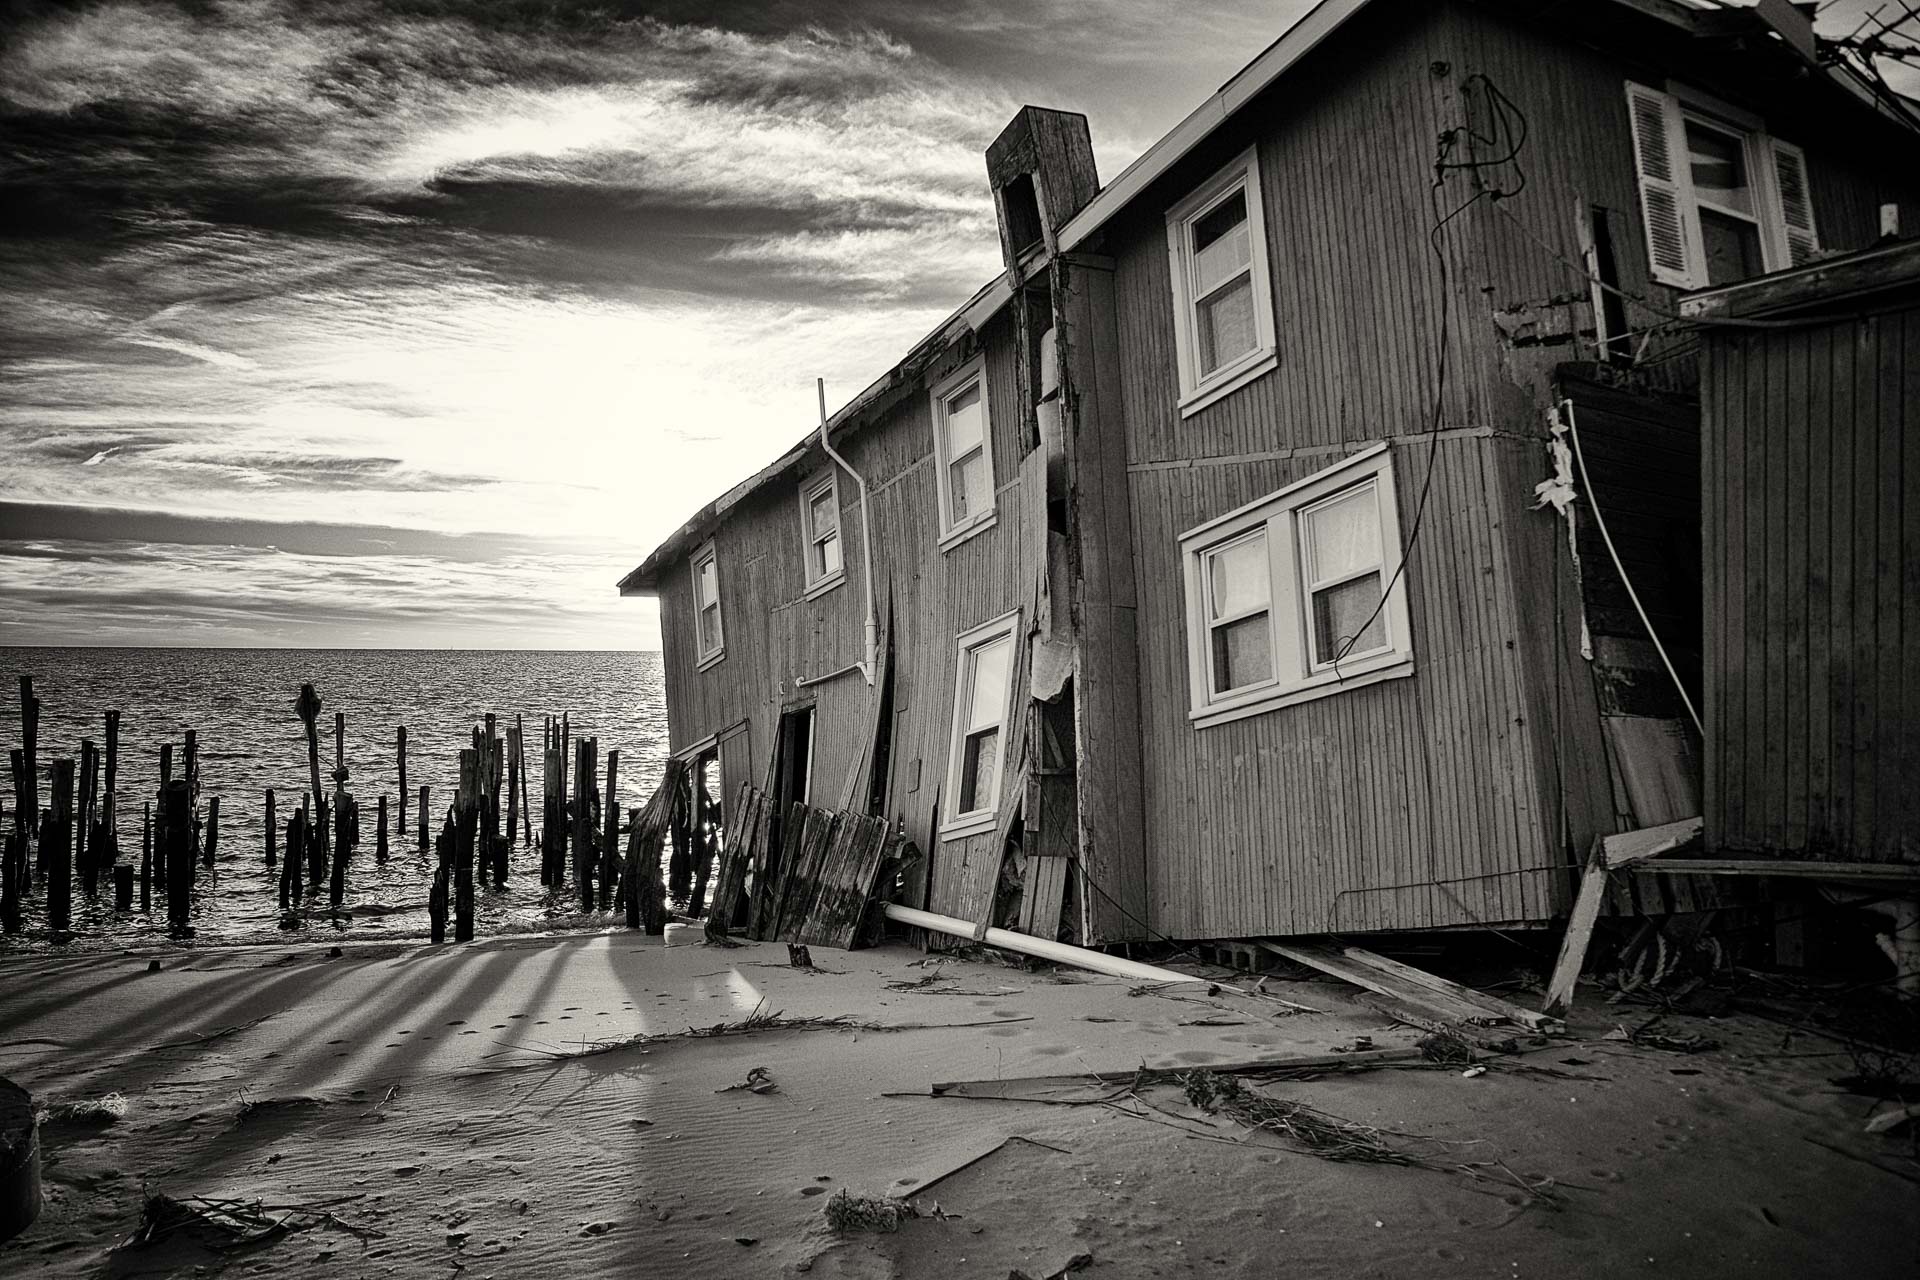 House in Fortescue falls into the sea after permanent damage from hurricane Sandy. Fortescue, also known as the "weakfish capital of the world" was severely damaged by the hurricane with many households suffering structural damage. Without state aid, its residents have been forced to leave and is now a ghost town, with most of its properties for sale.